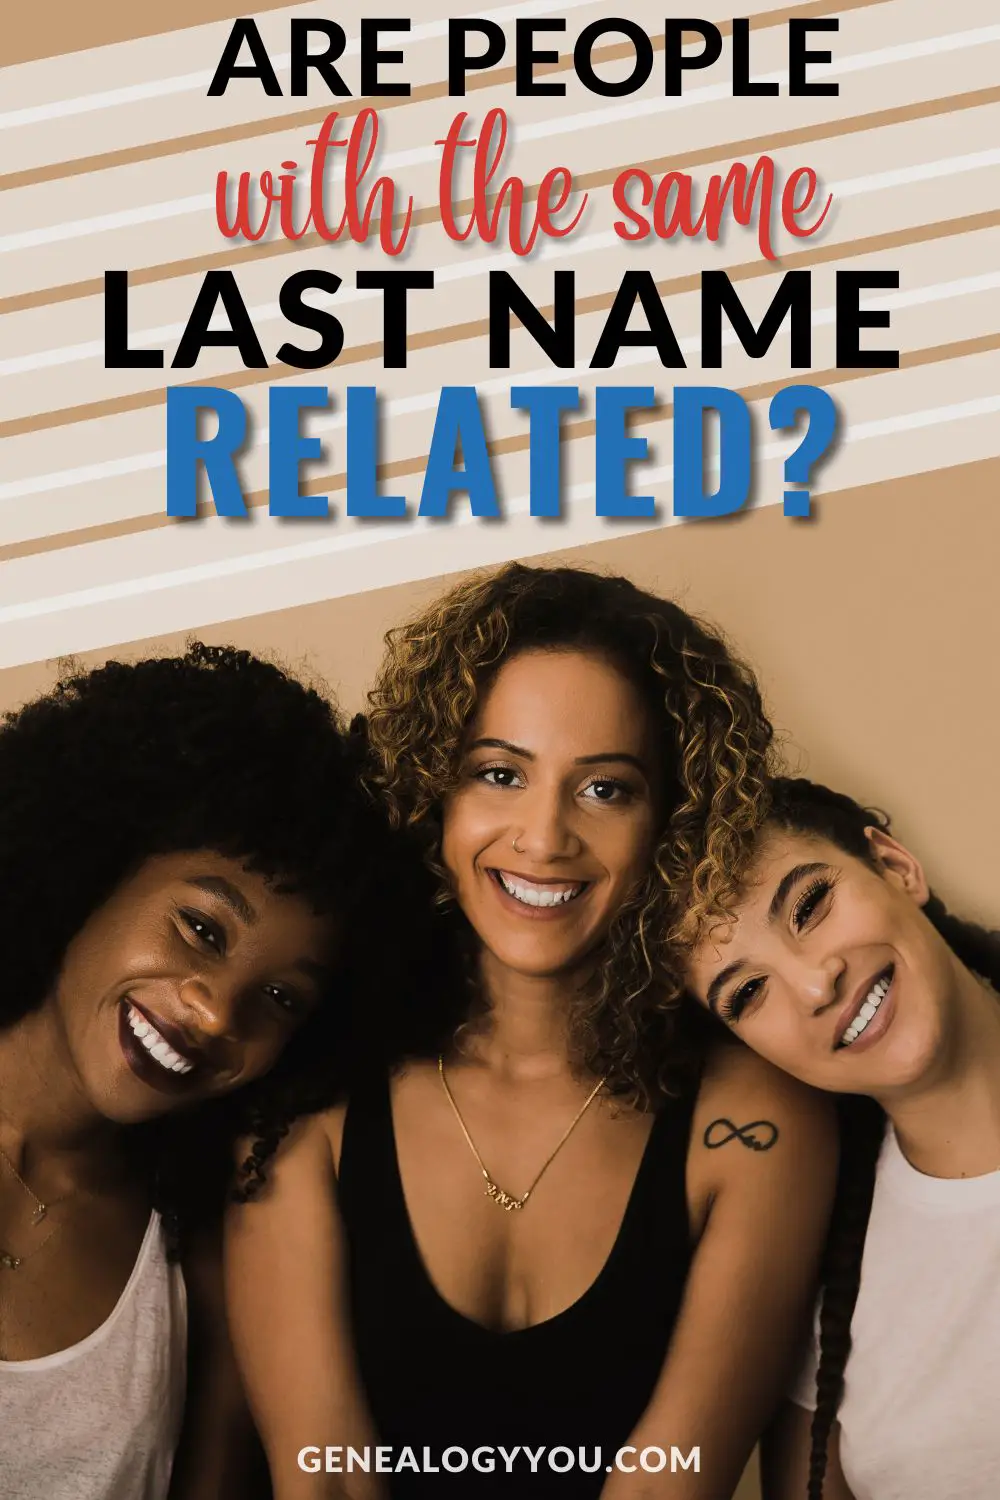 Photo of 3 smiling women with different race and text overlay that reads Are People With the Same Last Name Related 